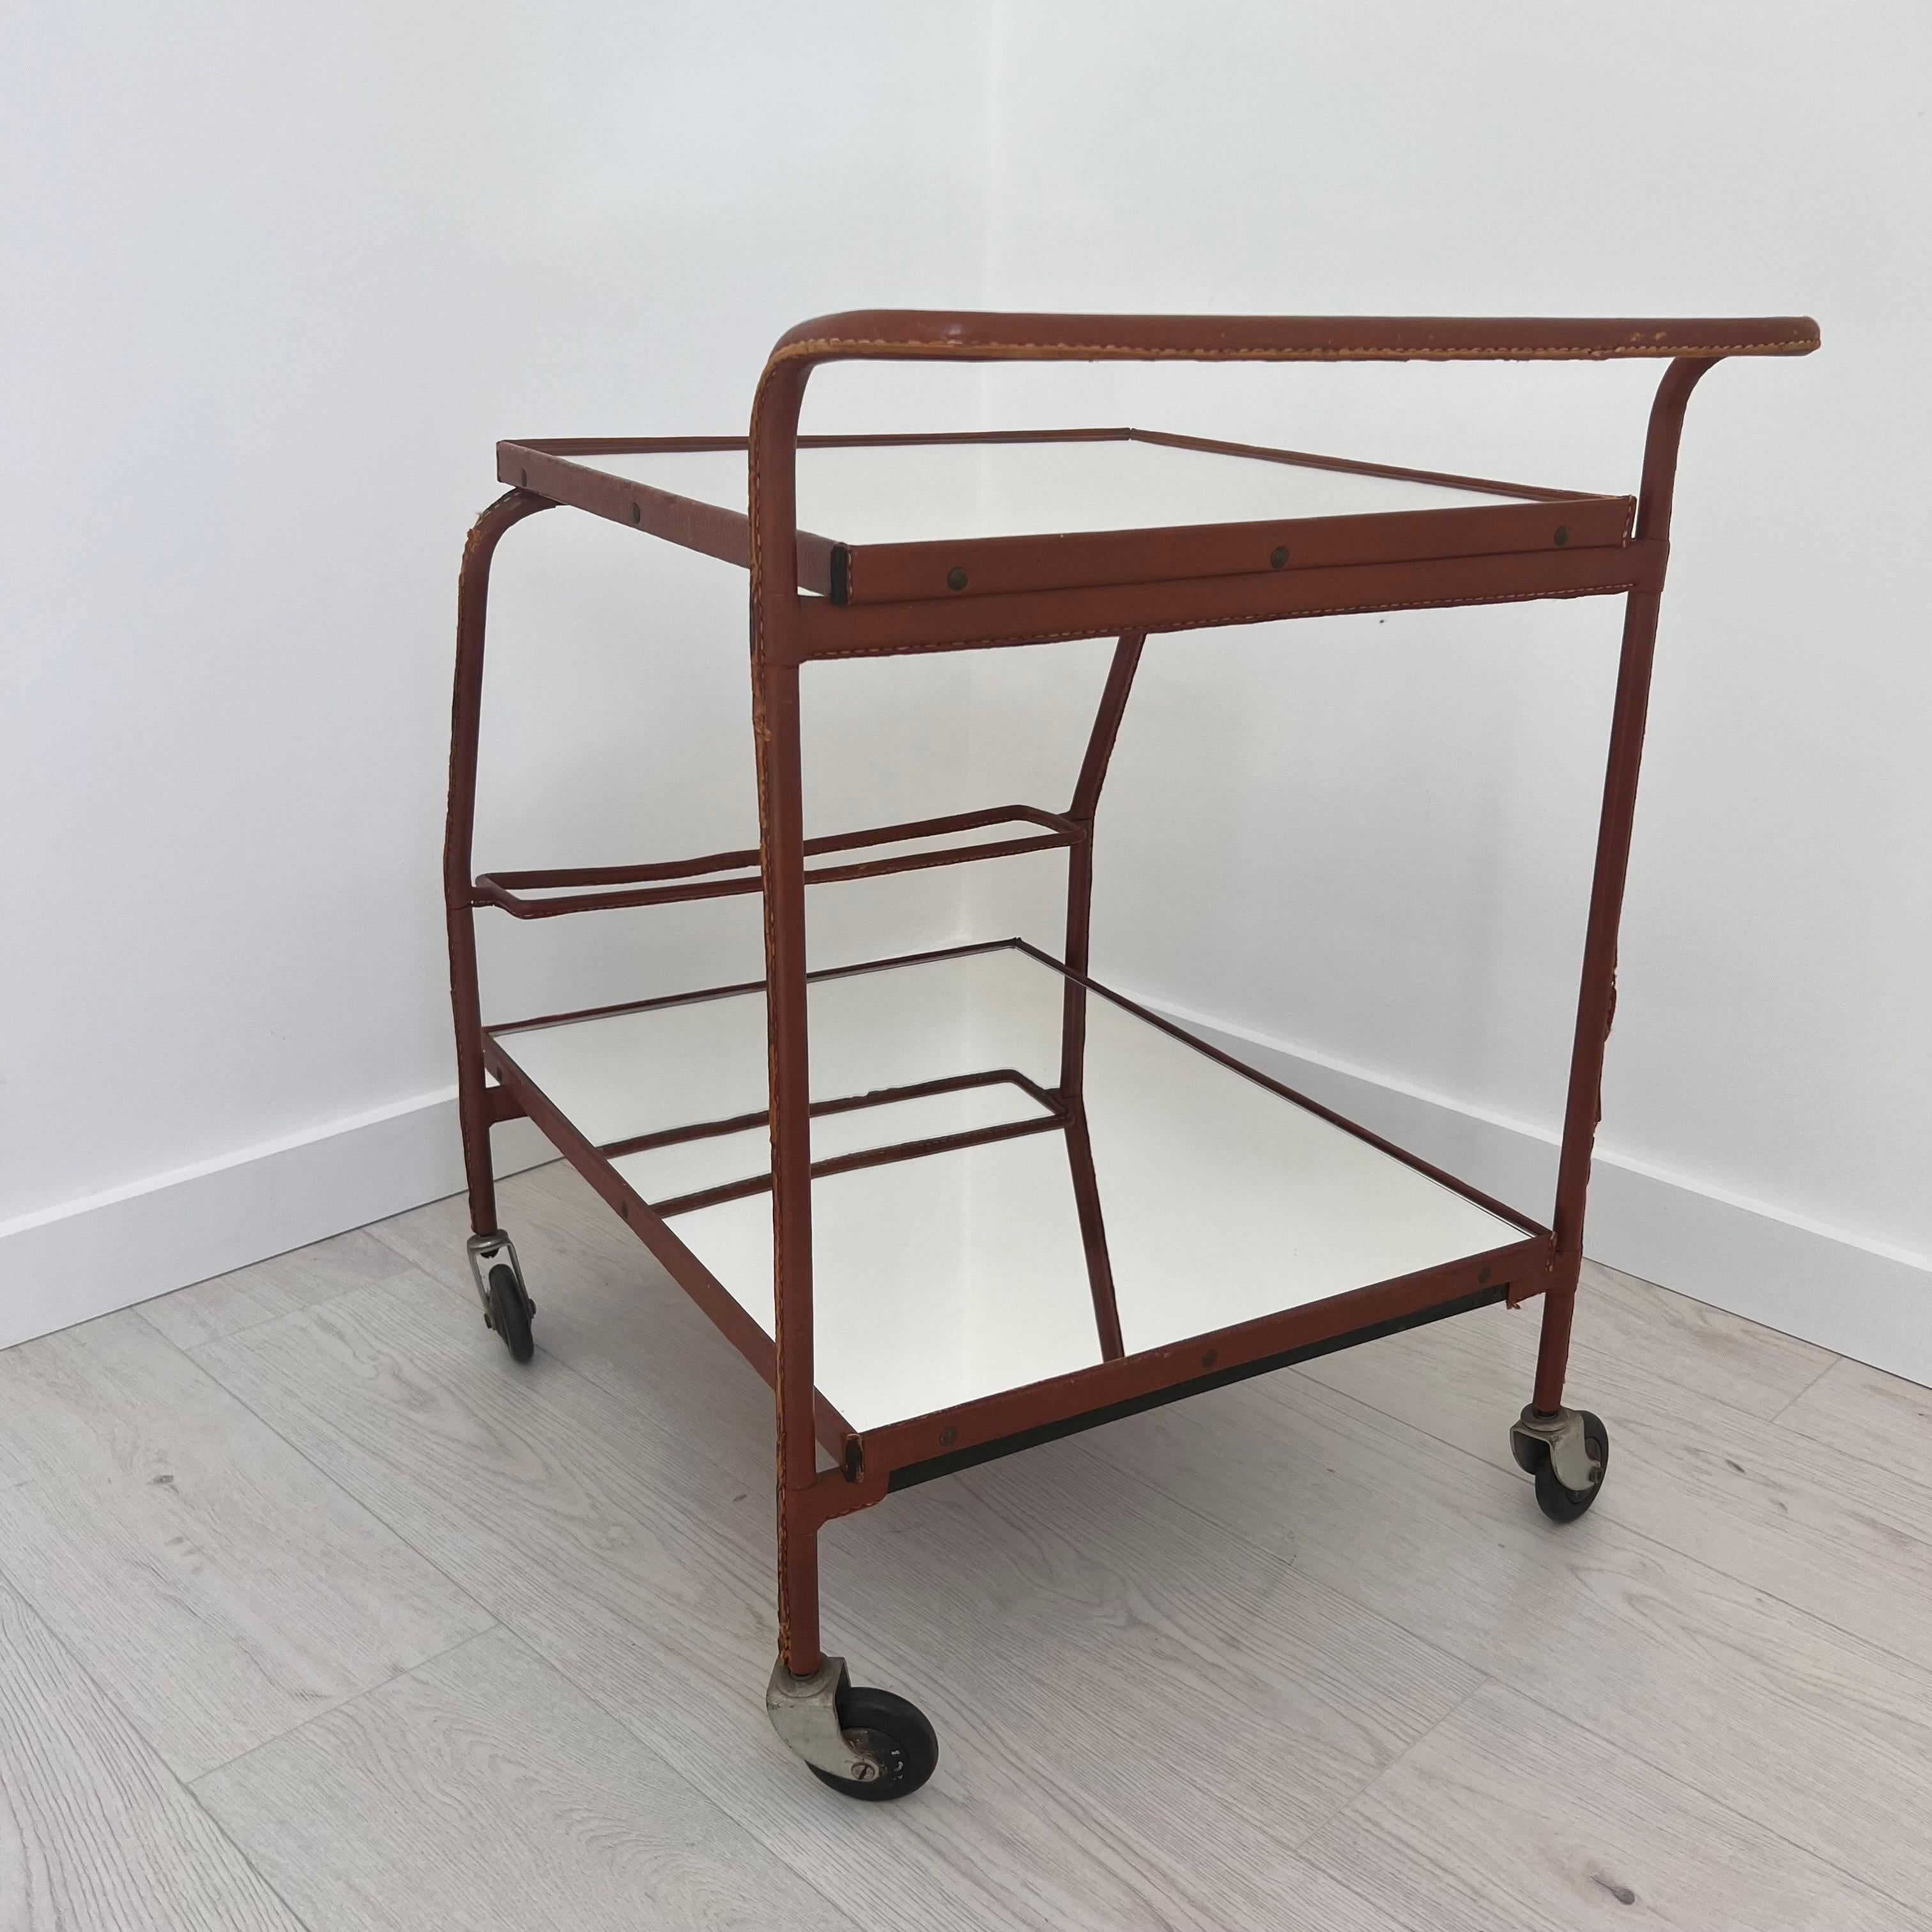 French Jacques Adnet Brown Leather Bar Cart, 1950s France For Sale